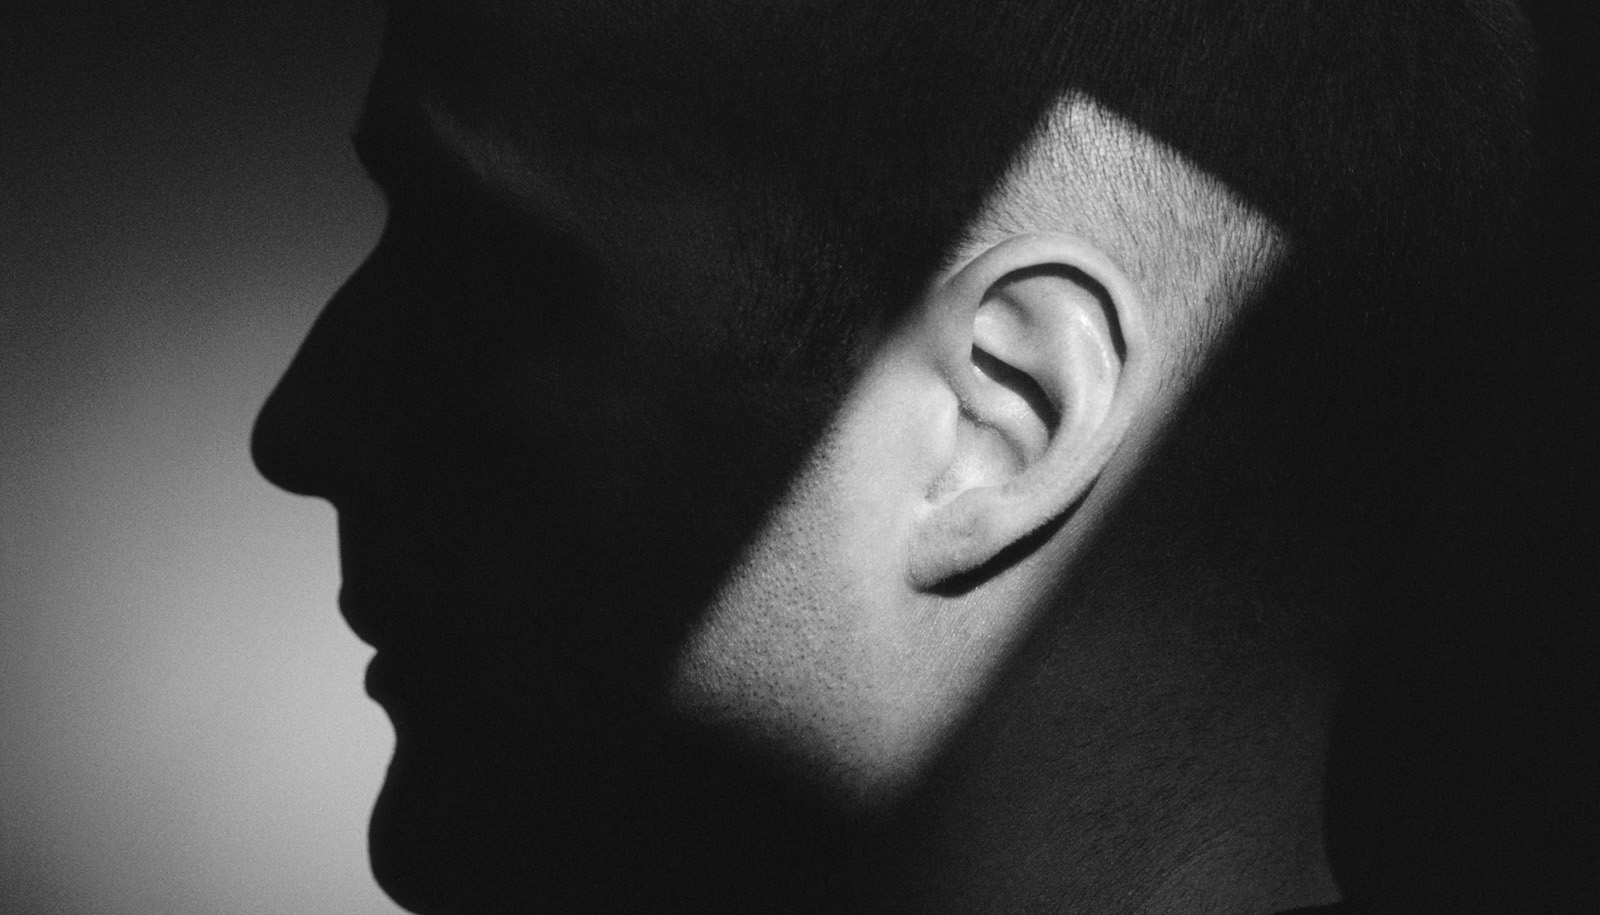 silhouette face in profile with rectangle of light on ear